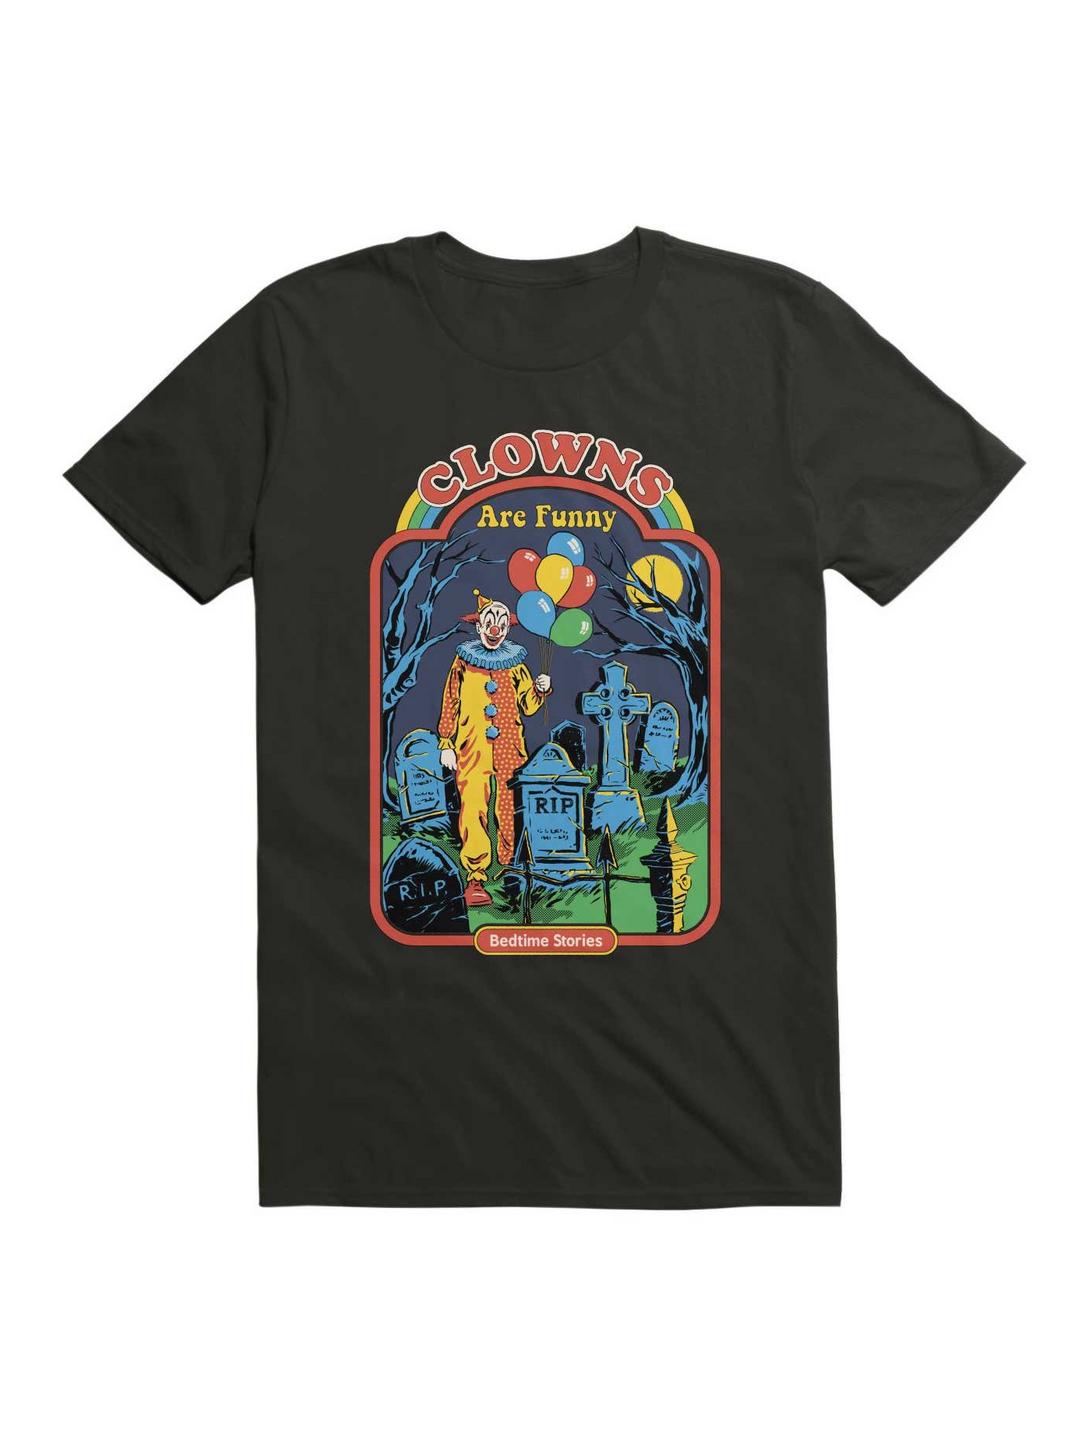 Clowns Are Funny T-Shirt By Steven Rhodes, BLACK, hi-res